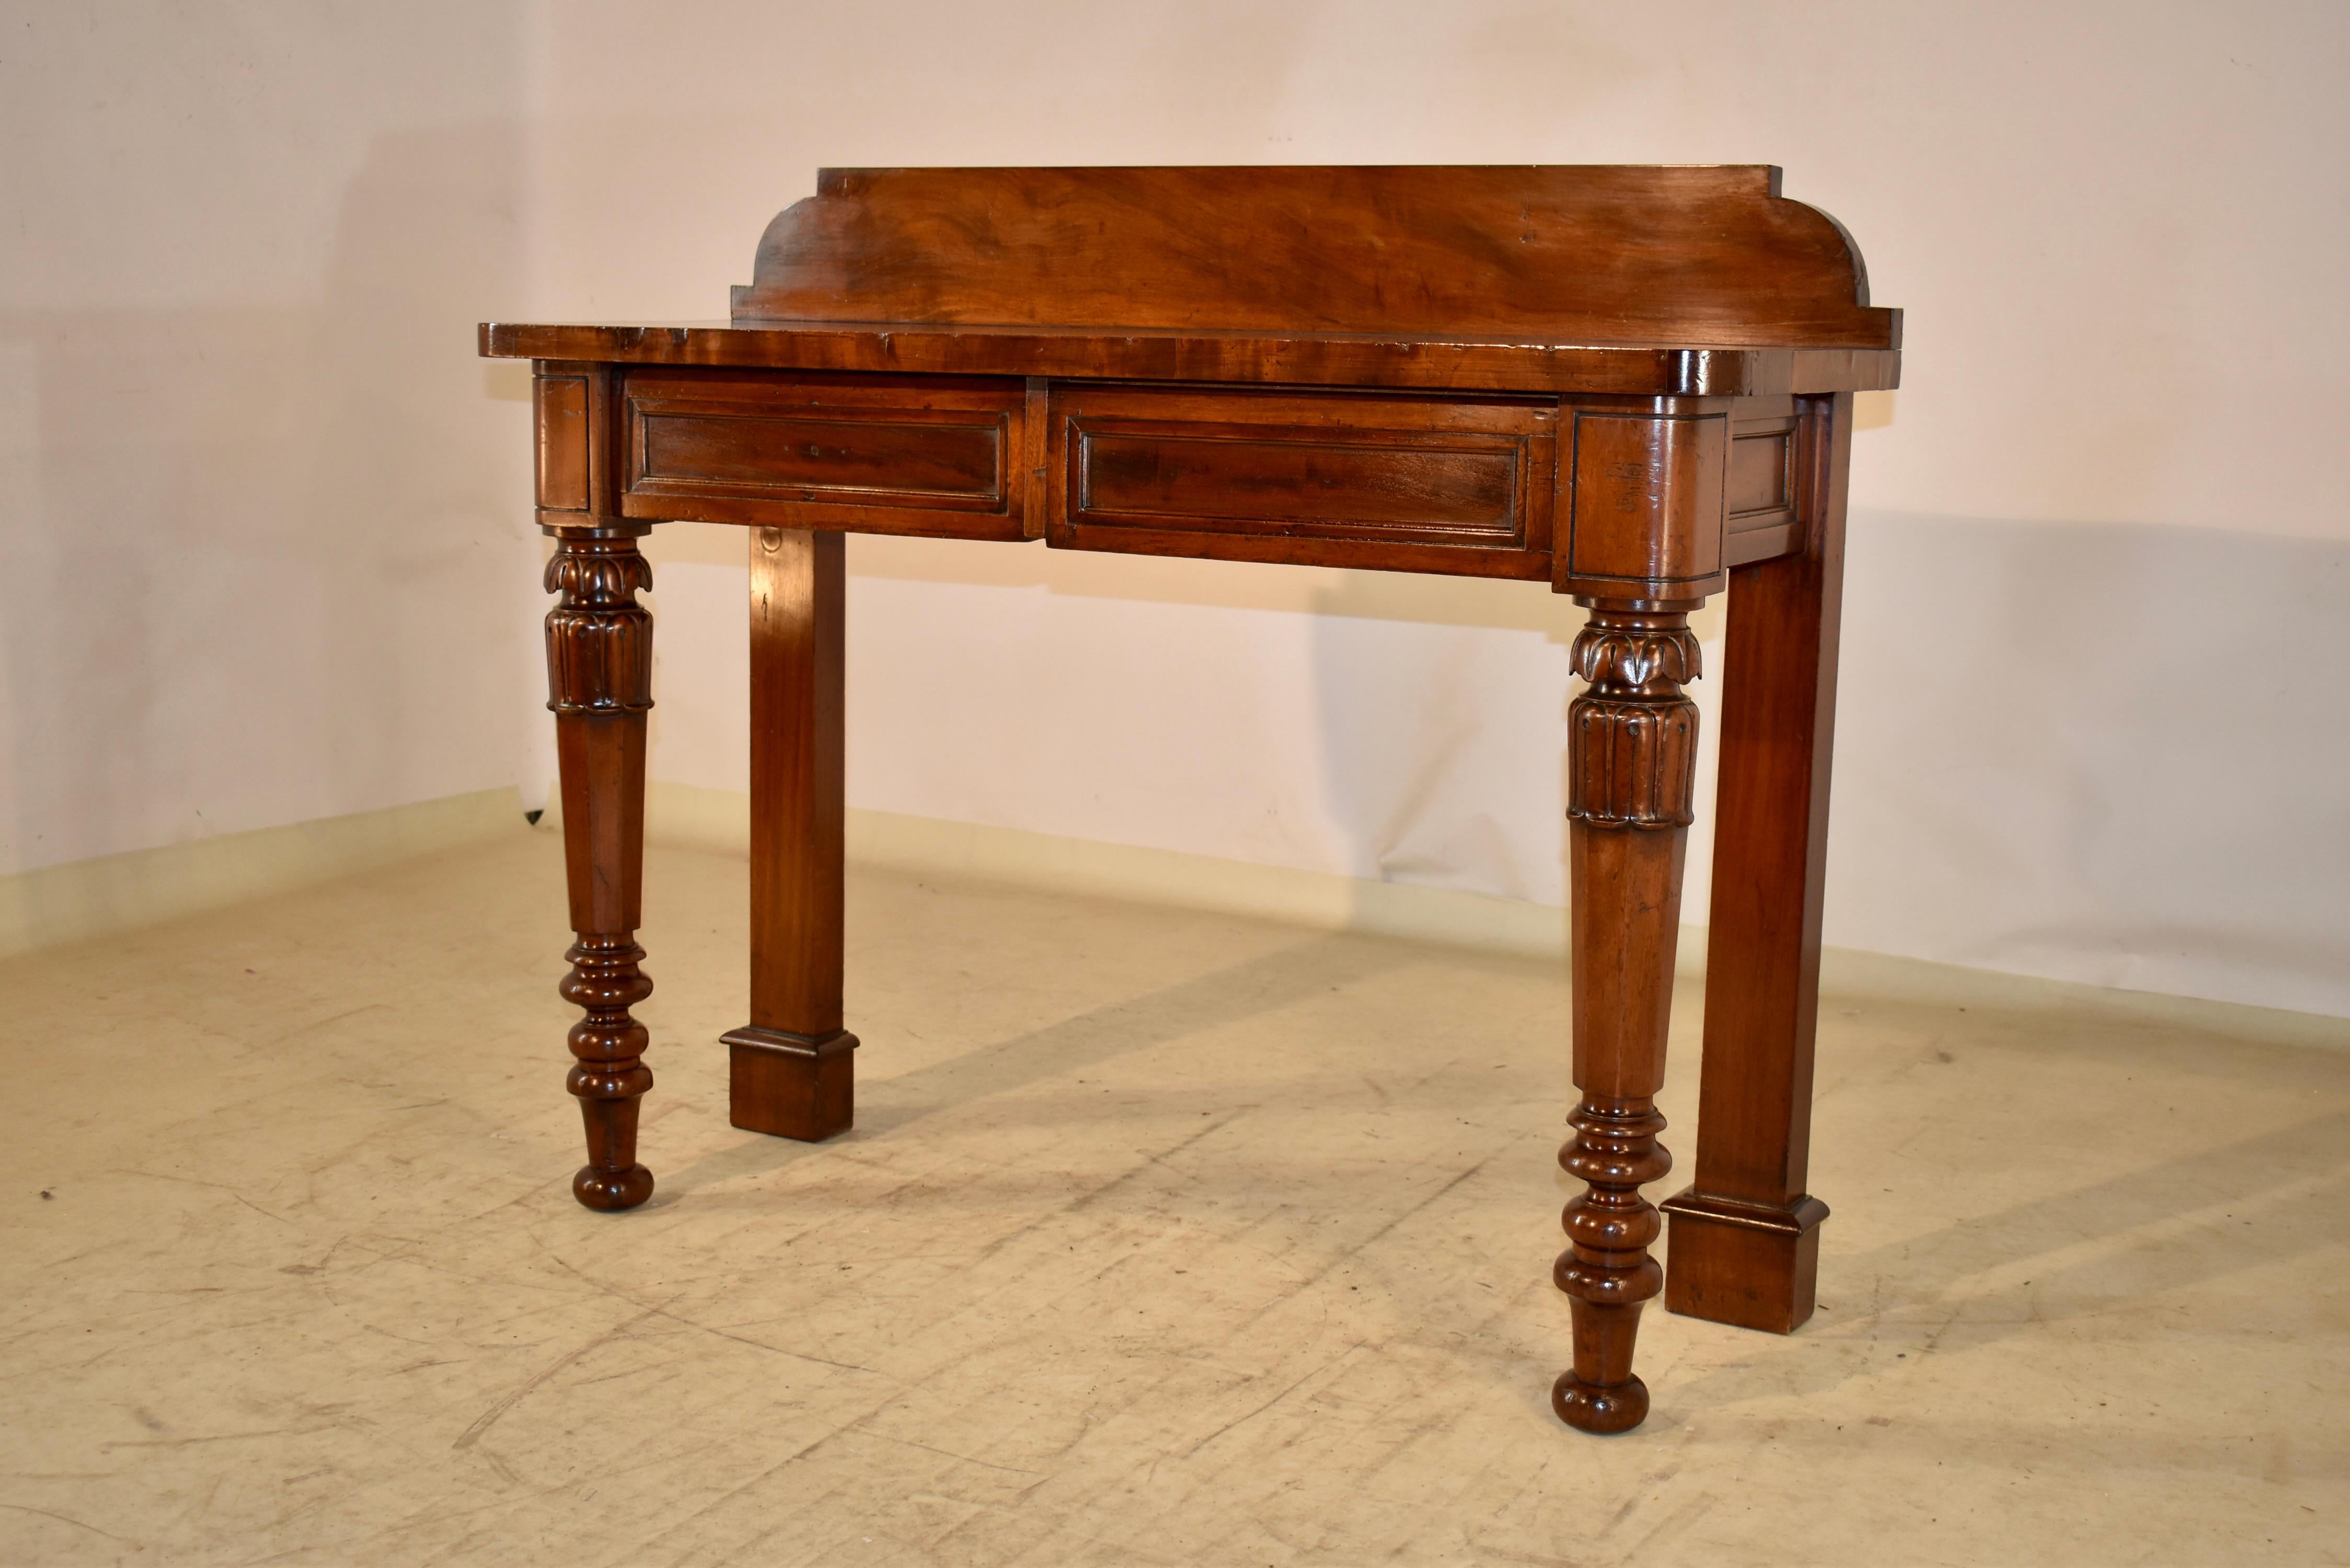 19th century mahogany console table from England with modern and clean lines.  The backsplash is nicely shaped on the ends over a gorgeously grained top.  The top follows down to simple paneled sides and two drawers in the front of the piece, which